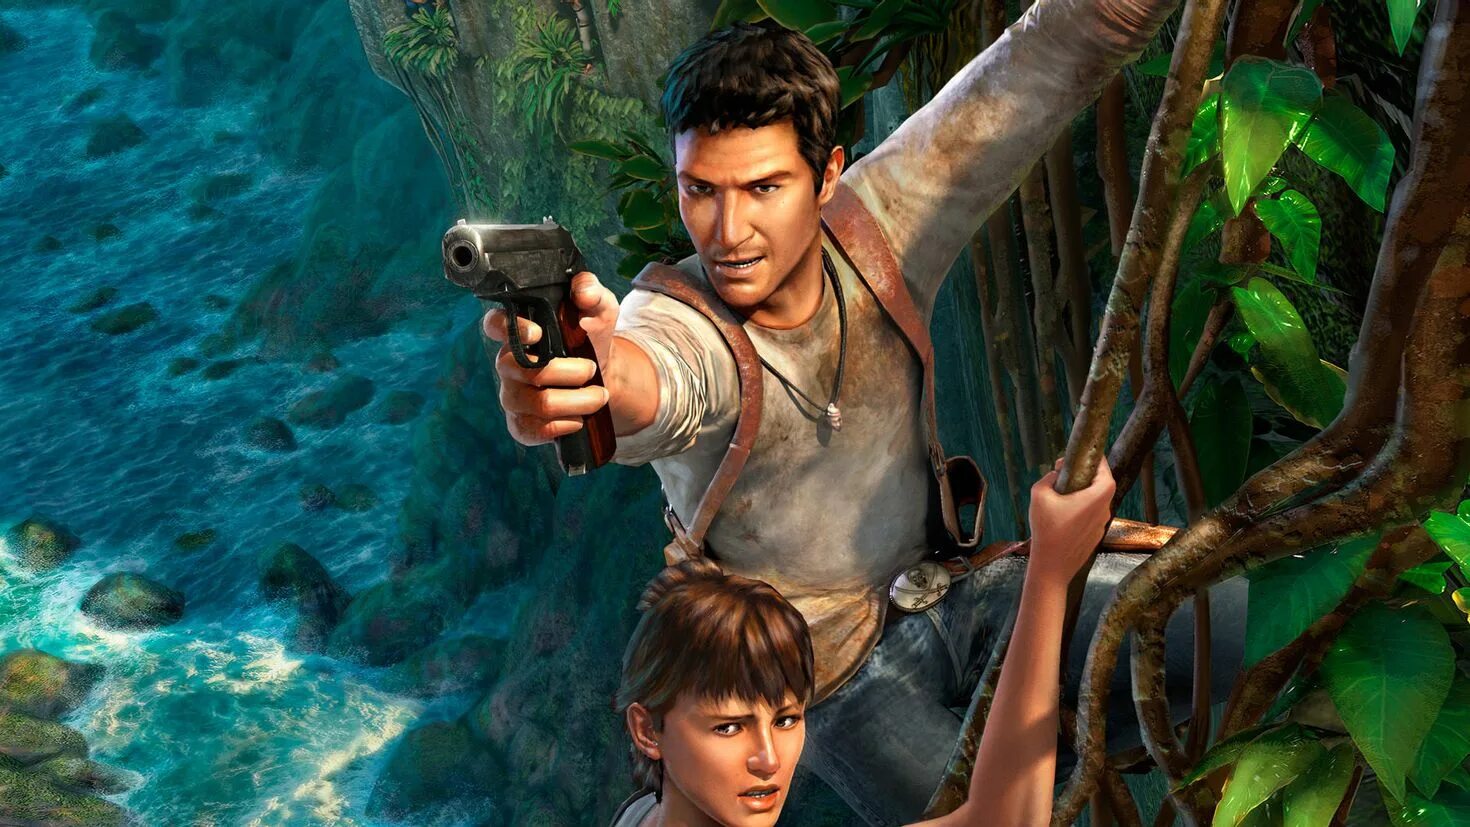 Игра Uncharted Drake's Fortune. Анчартед 1. Дрейк анчартед. Uncharted Drake's Fortune ps3. Chaixas games